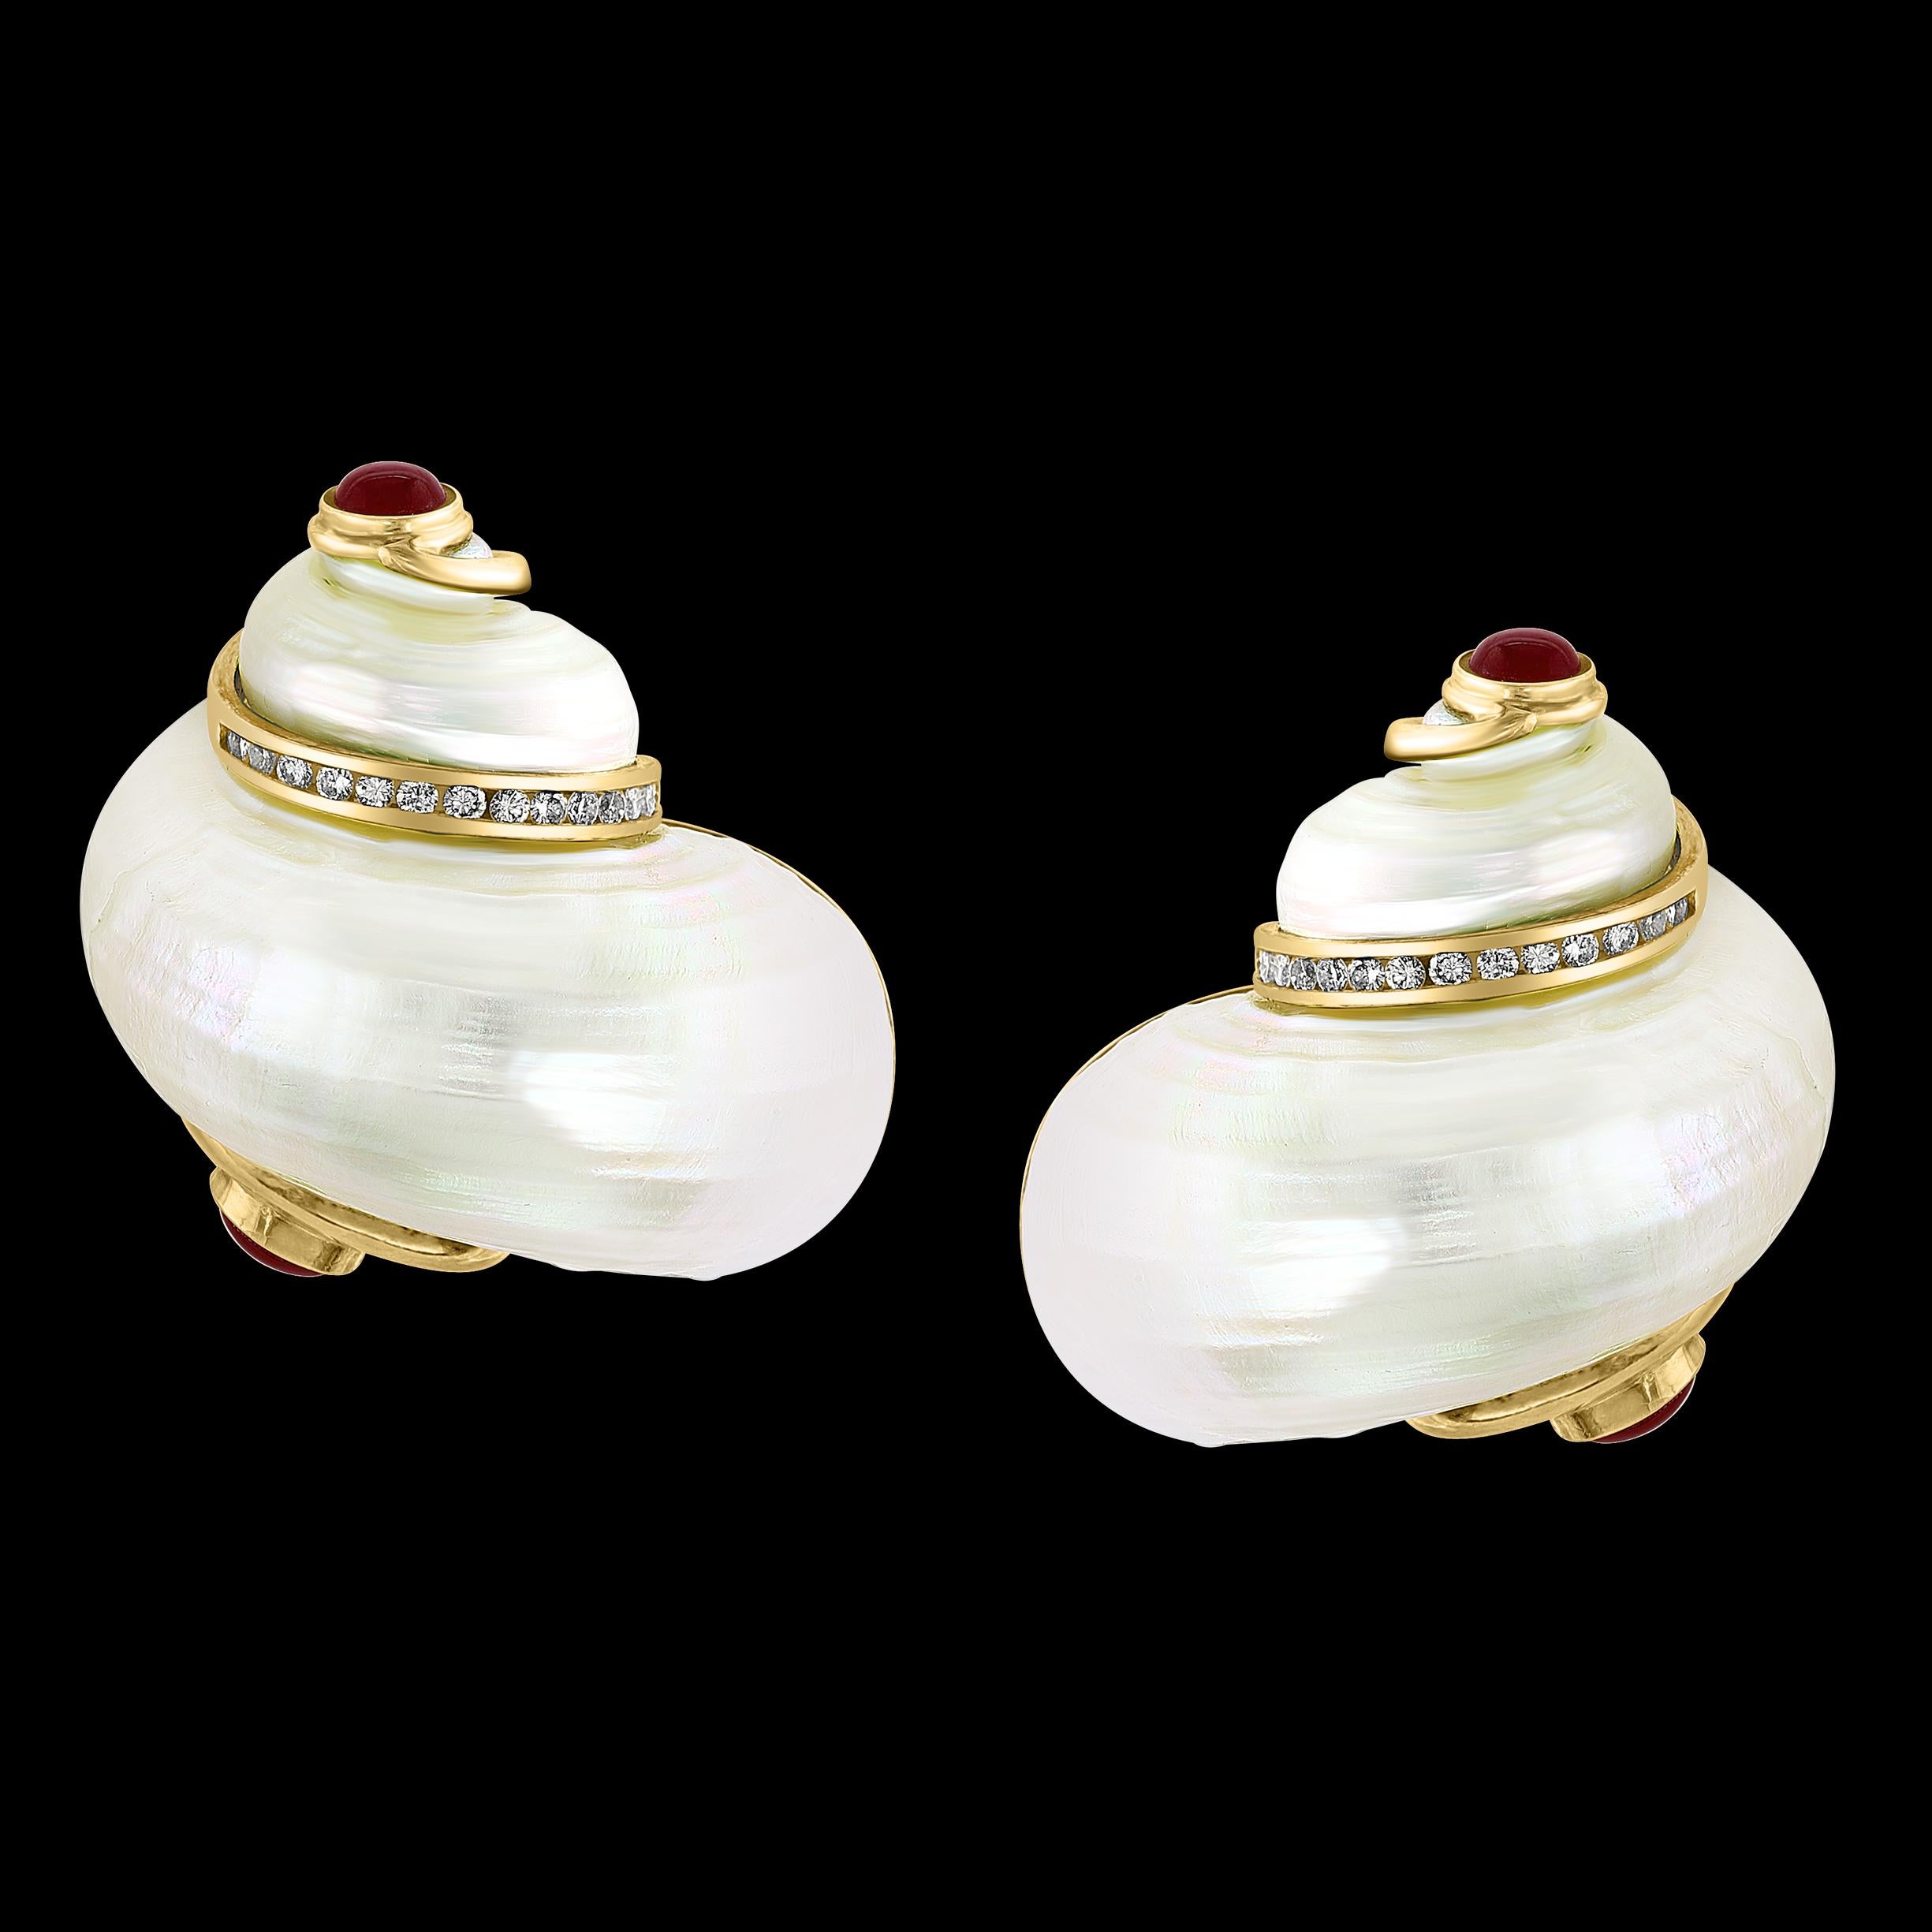 Vintage Seaman Schepps 18KT Gold Turbo Shell Diamond Ruby Earrings Extra Large
Vintage Seaman Schepps 18KT Yellow Gold Turbo Shell Diamond and Ruby extra large earrings. Earring contain diamonds and rubies. They weigh 52 grams. We do not have the